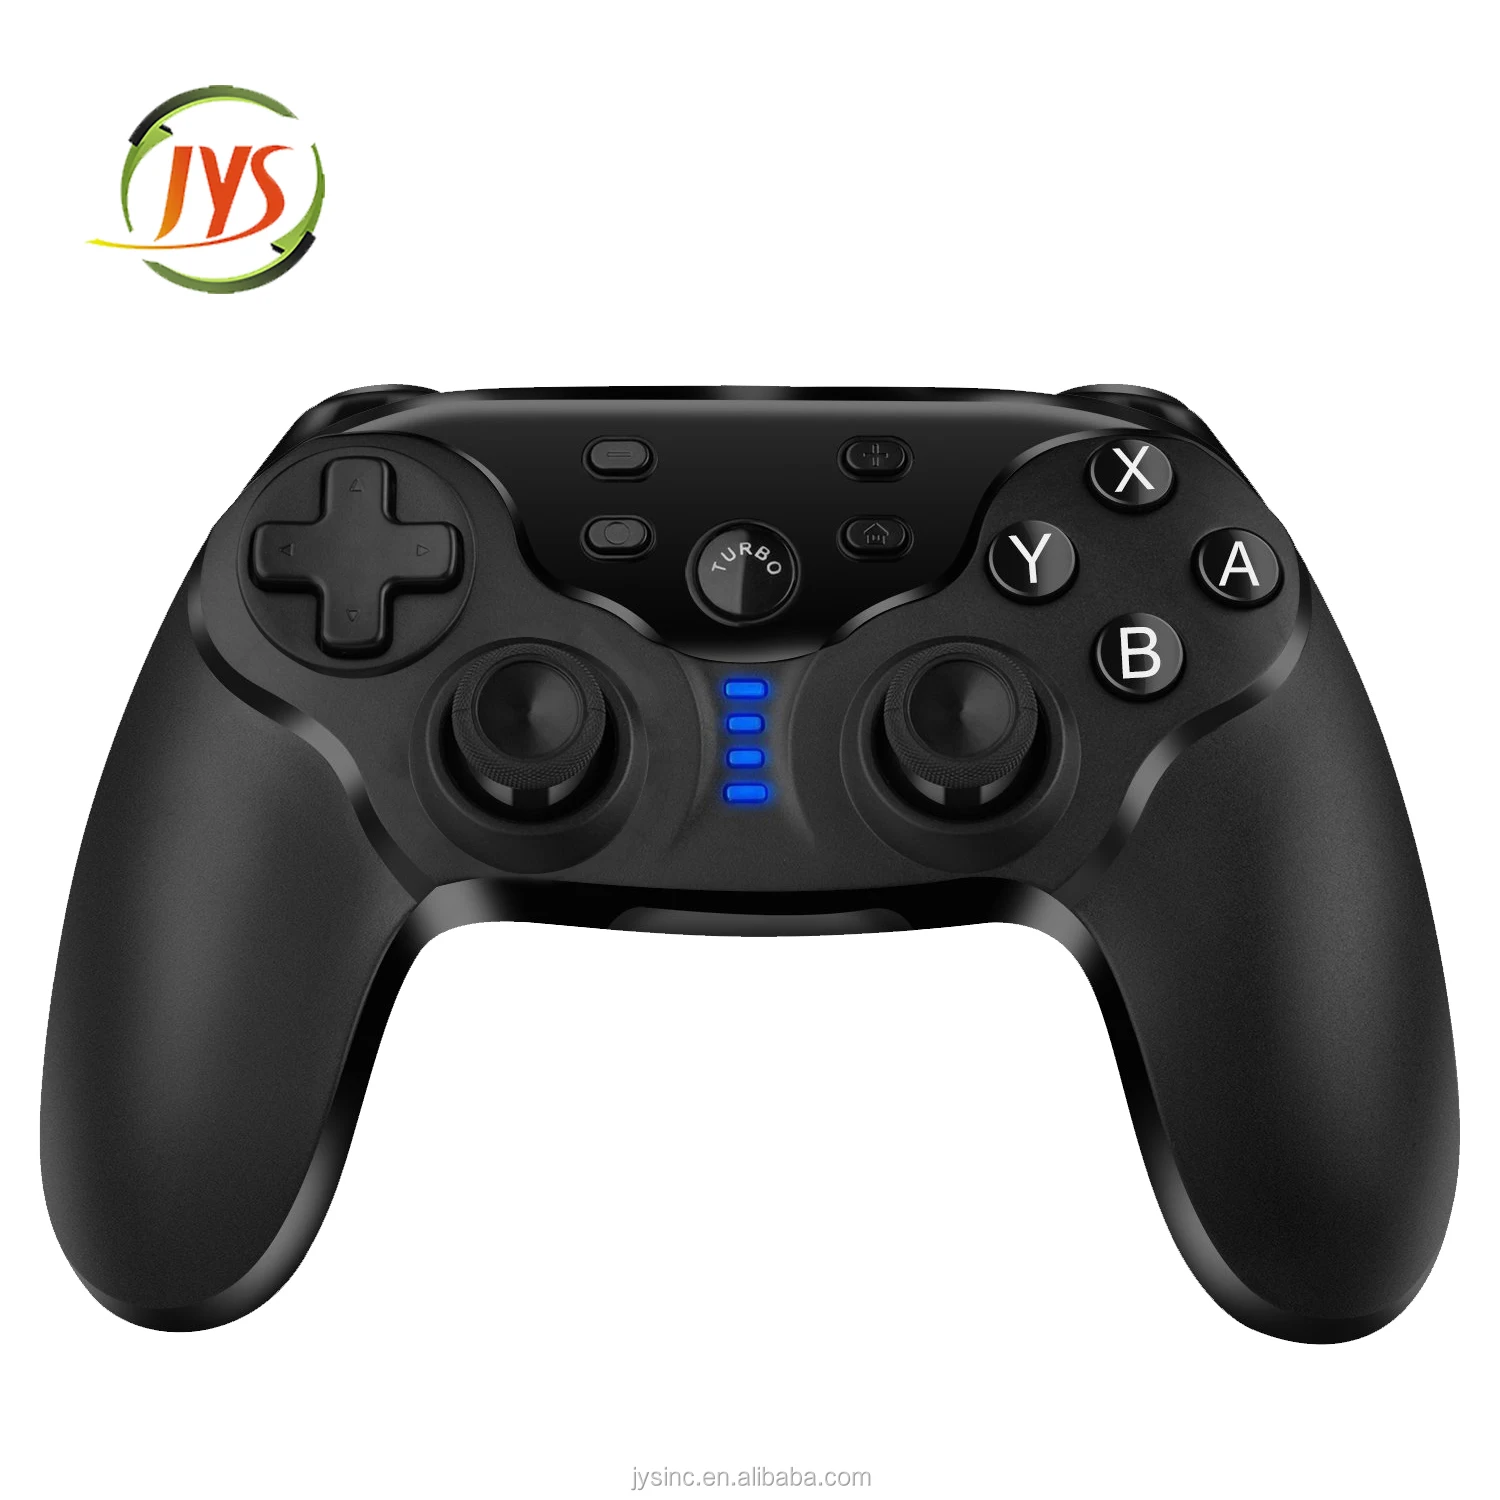 Wireless Controller For Switch Gamepad Joystick Symmetric Layout - Buy Wireless Controller,Controller For Ns,Gamepad For Ns Product Alibaba.com